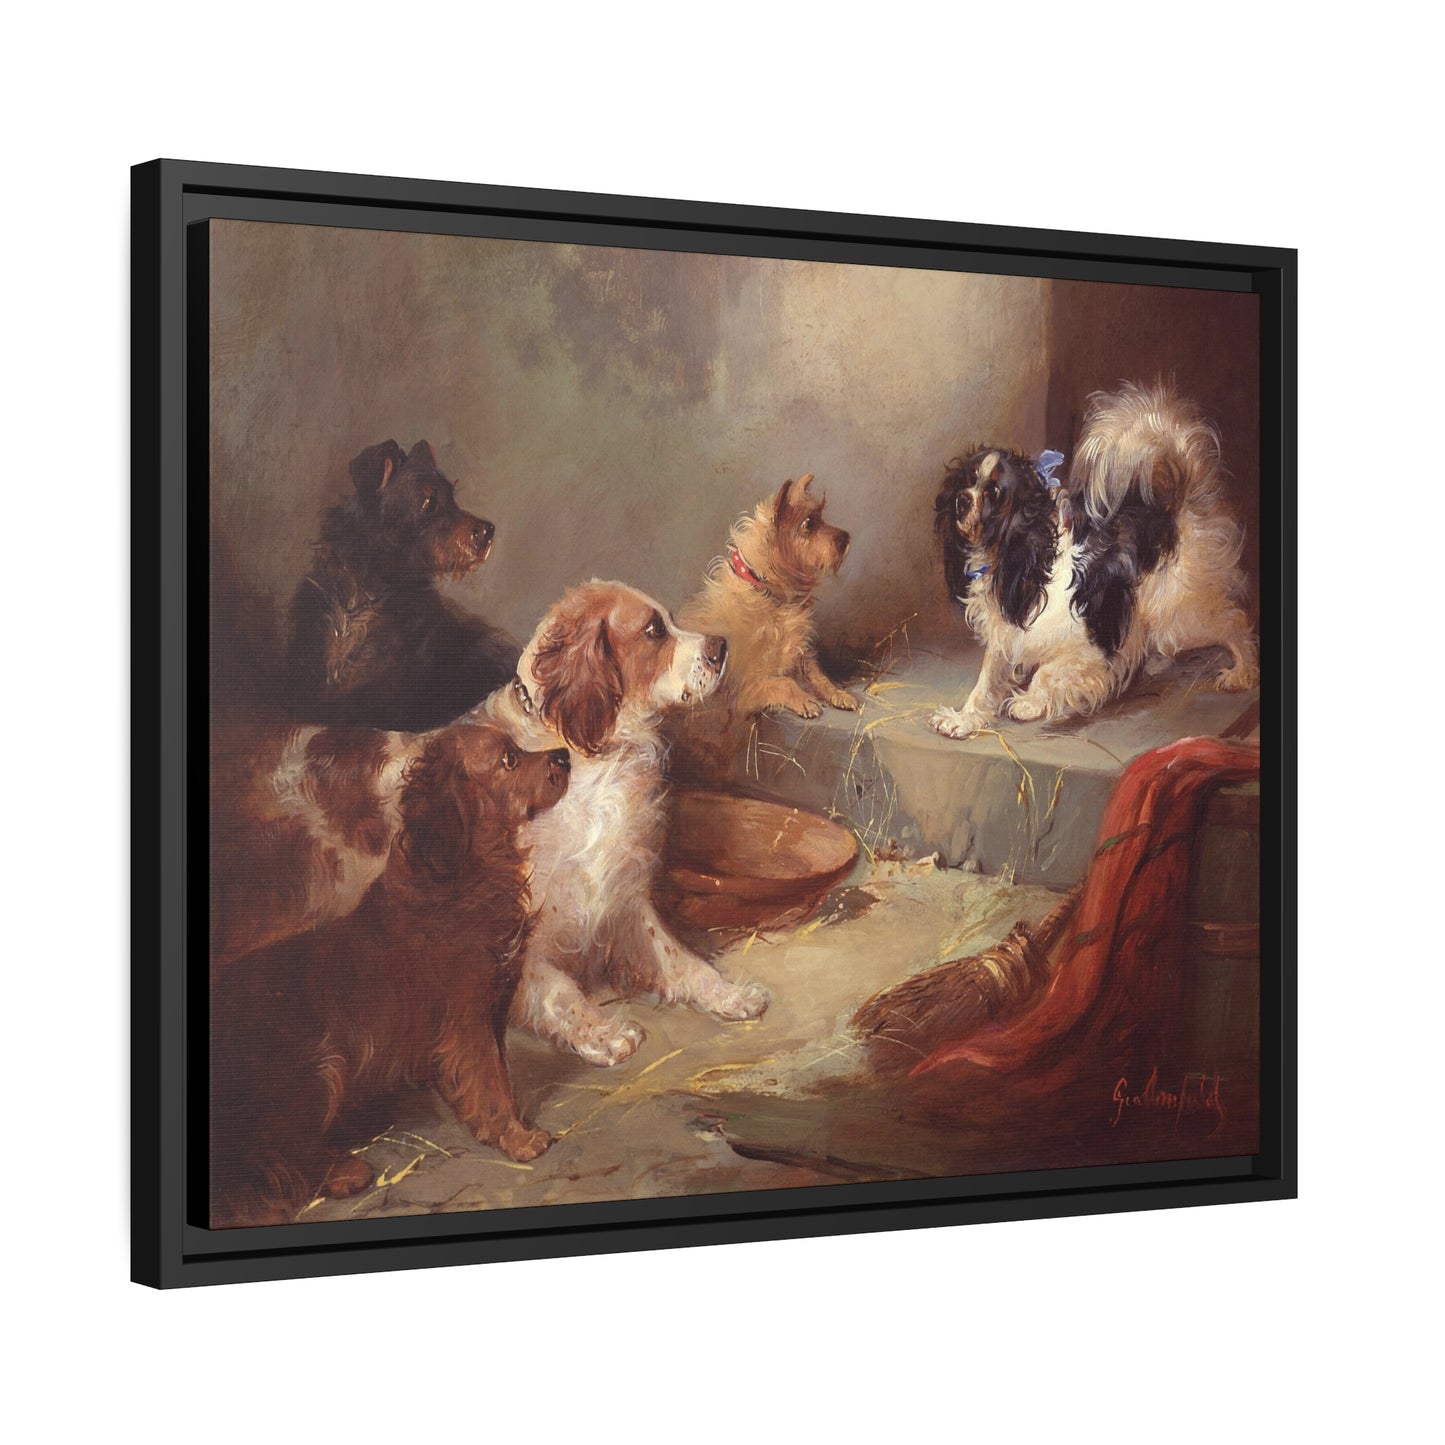 George Armfield: "The Great Debate" - Framed Canvas Reproduction